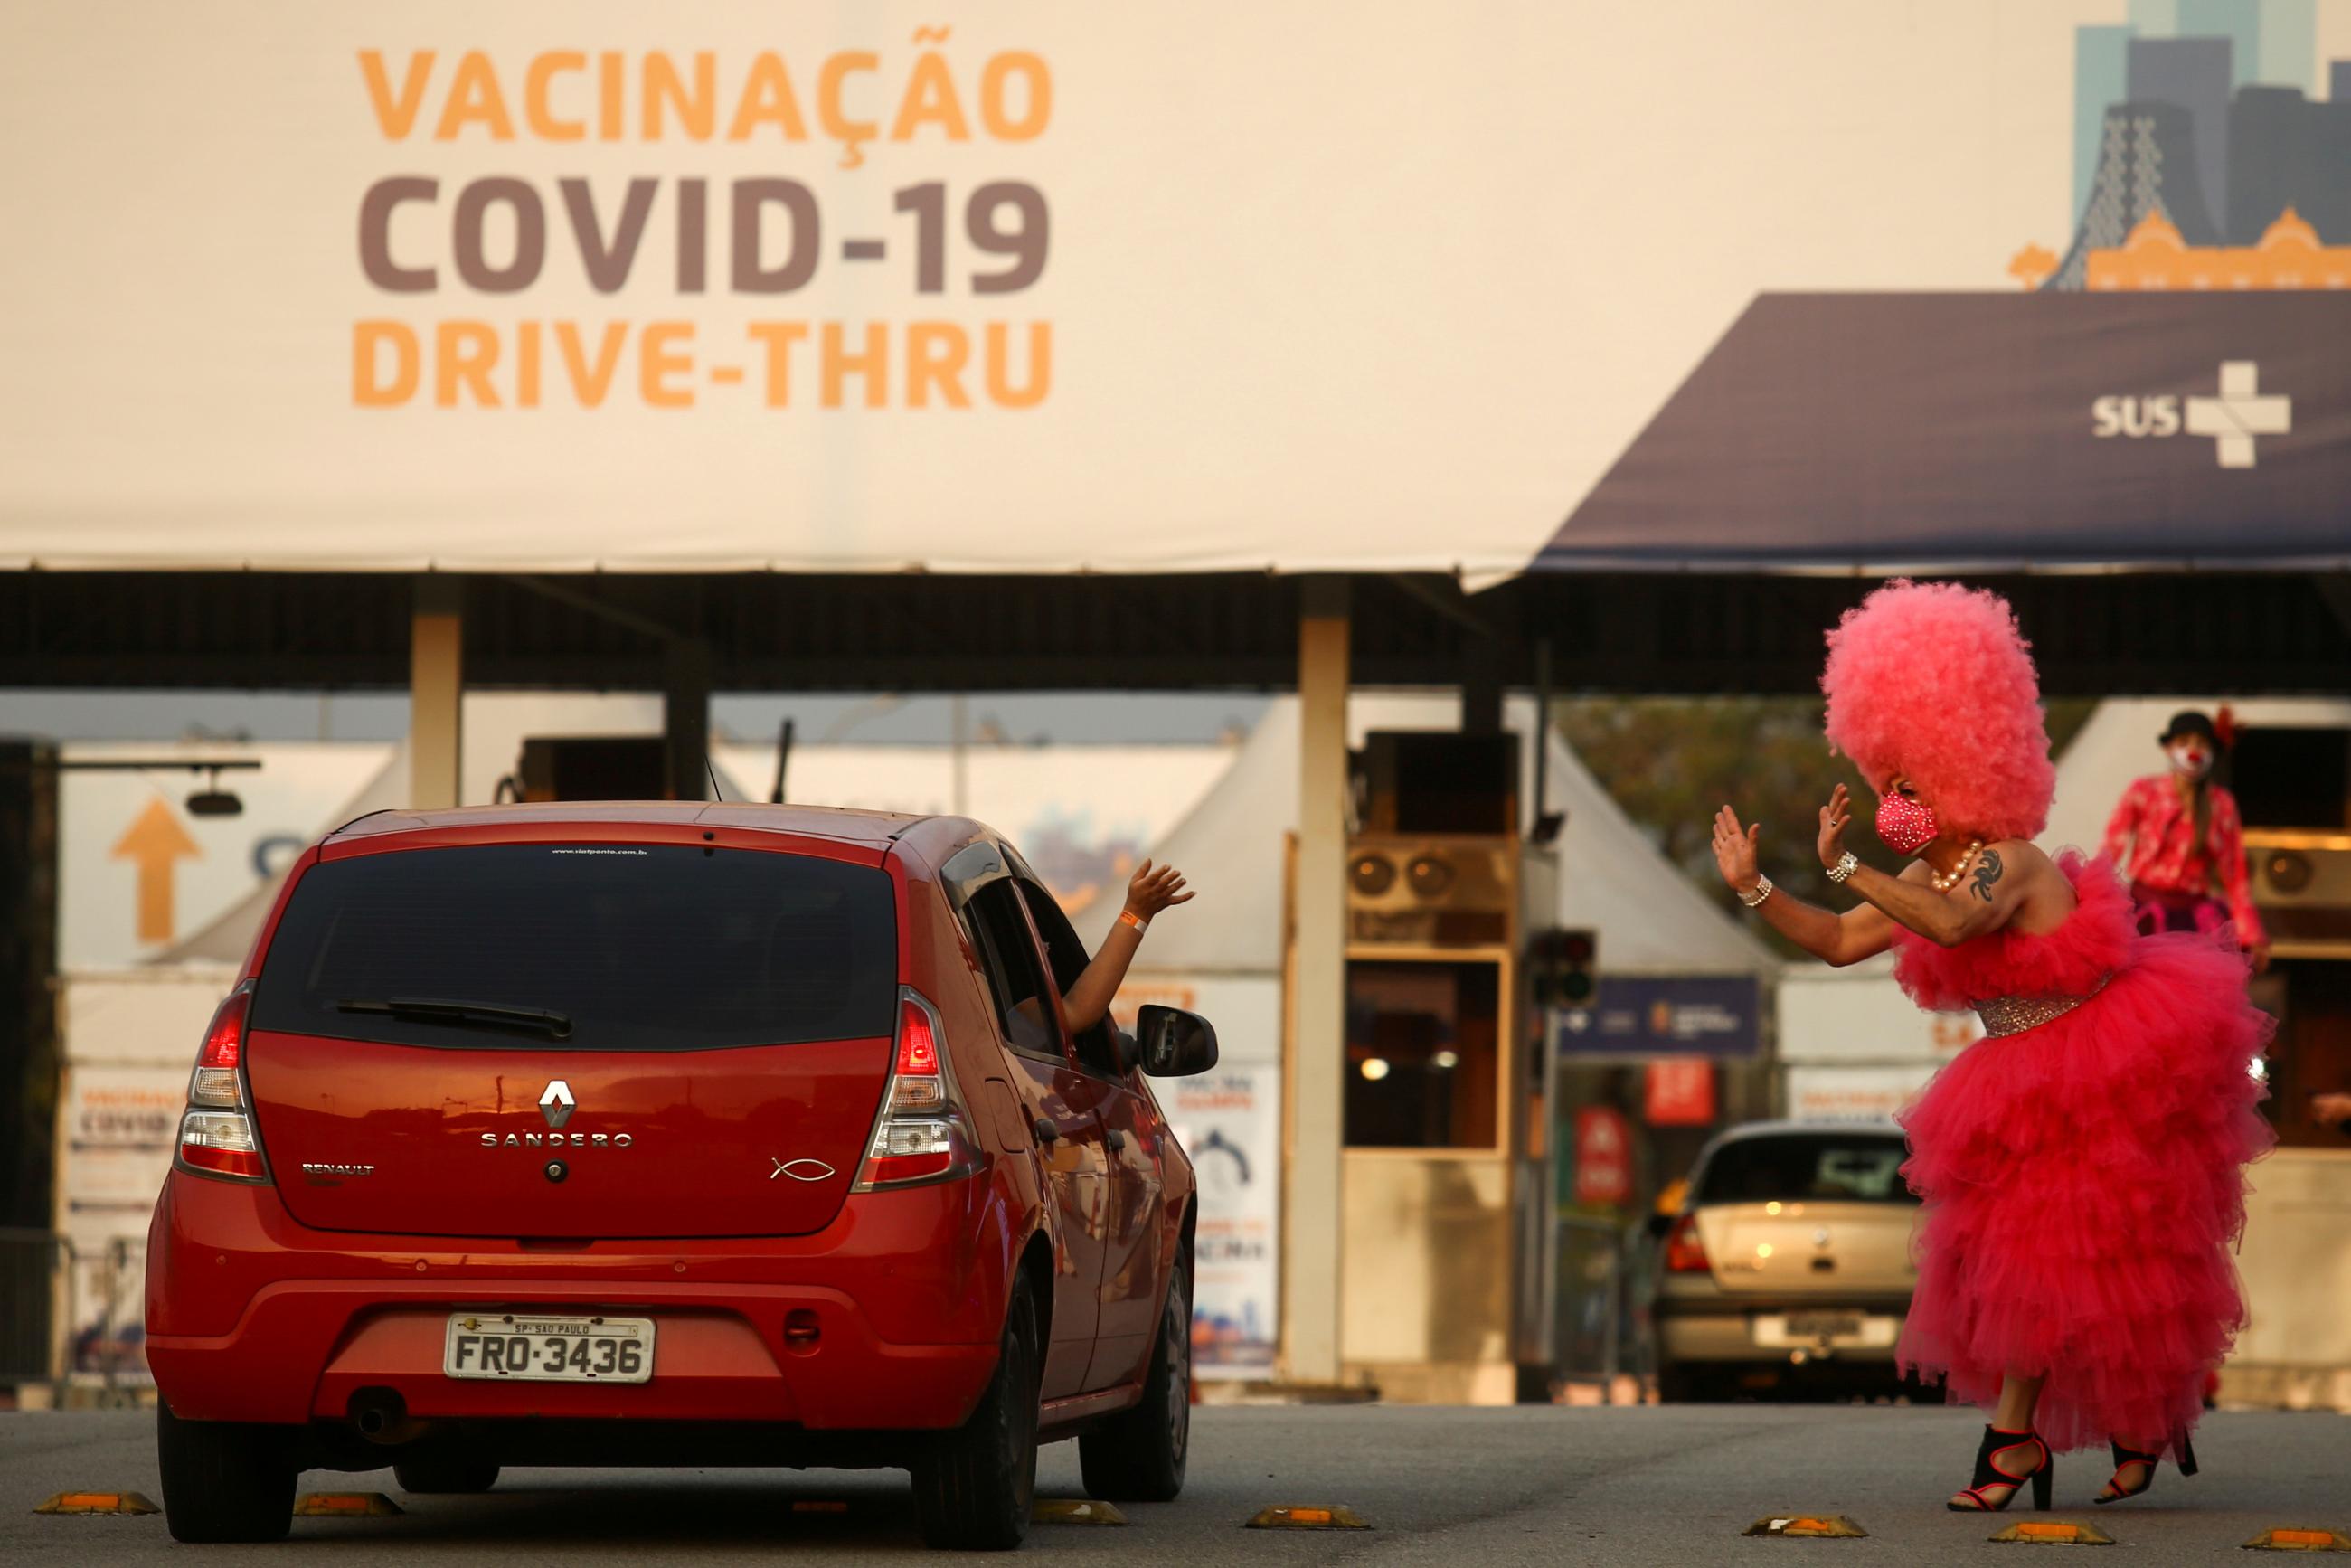 A drag queen in a tall pink wig and long pink dress waves to a car at a vaccine drive-thru as Sao Paulo begins to vaccinate young people from 18 to 21 years old against COVID-19, in Sao Paulo, Brazil on August 14, 2021. 